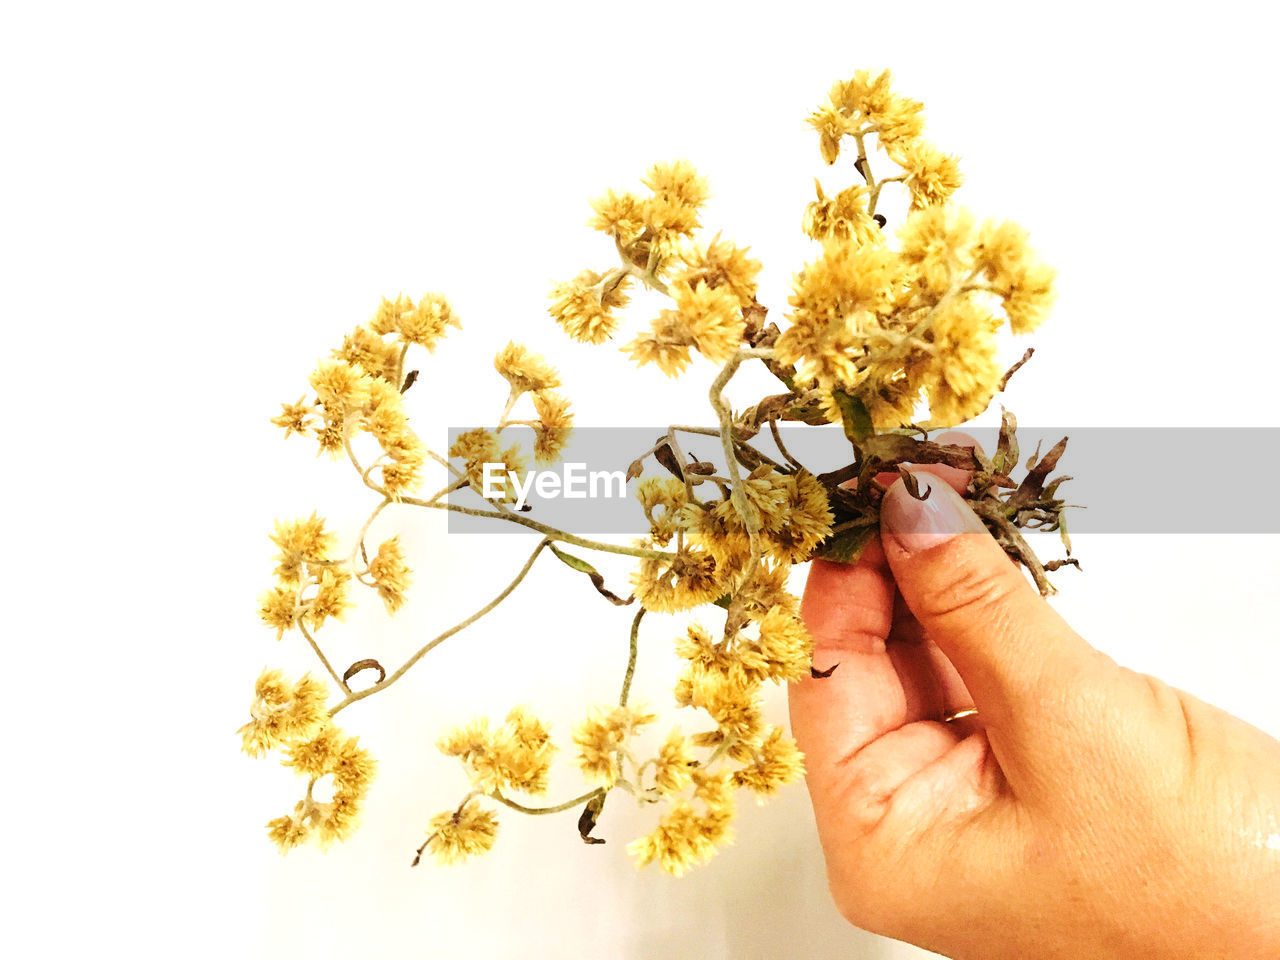 Cropped hands of person holding flowers against white background